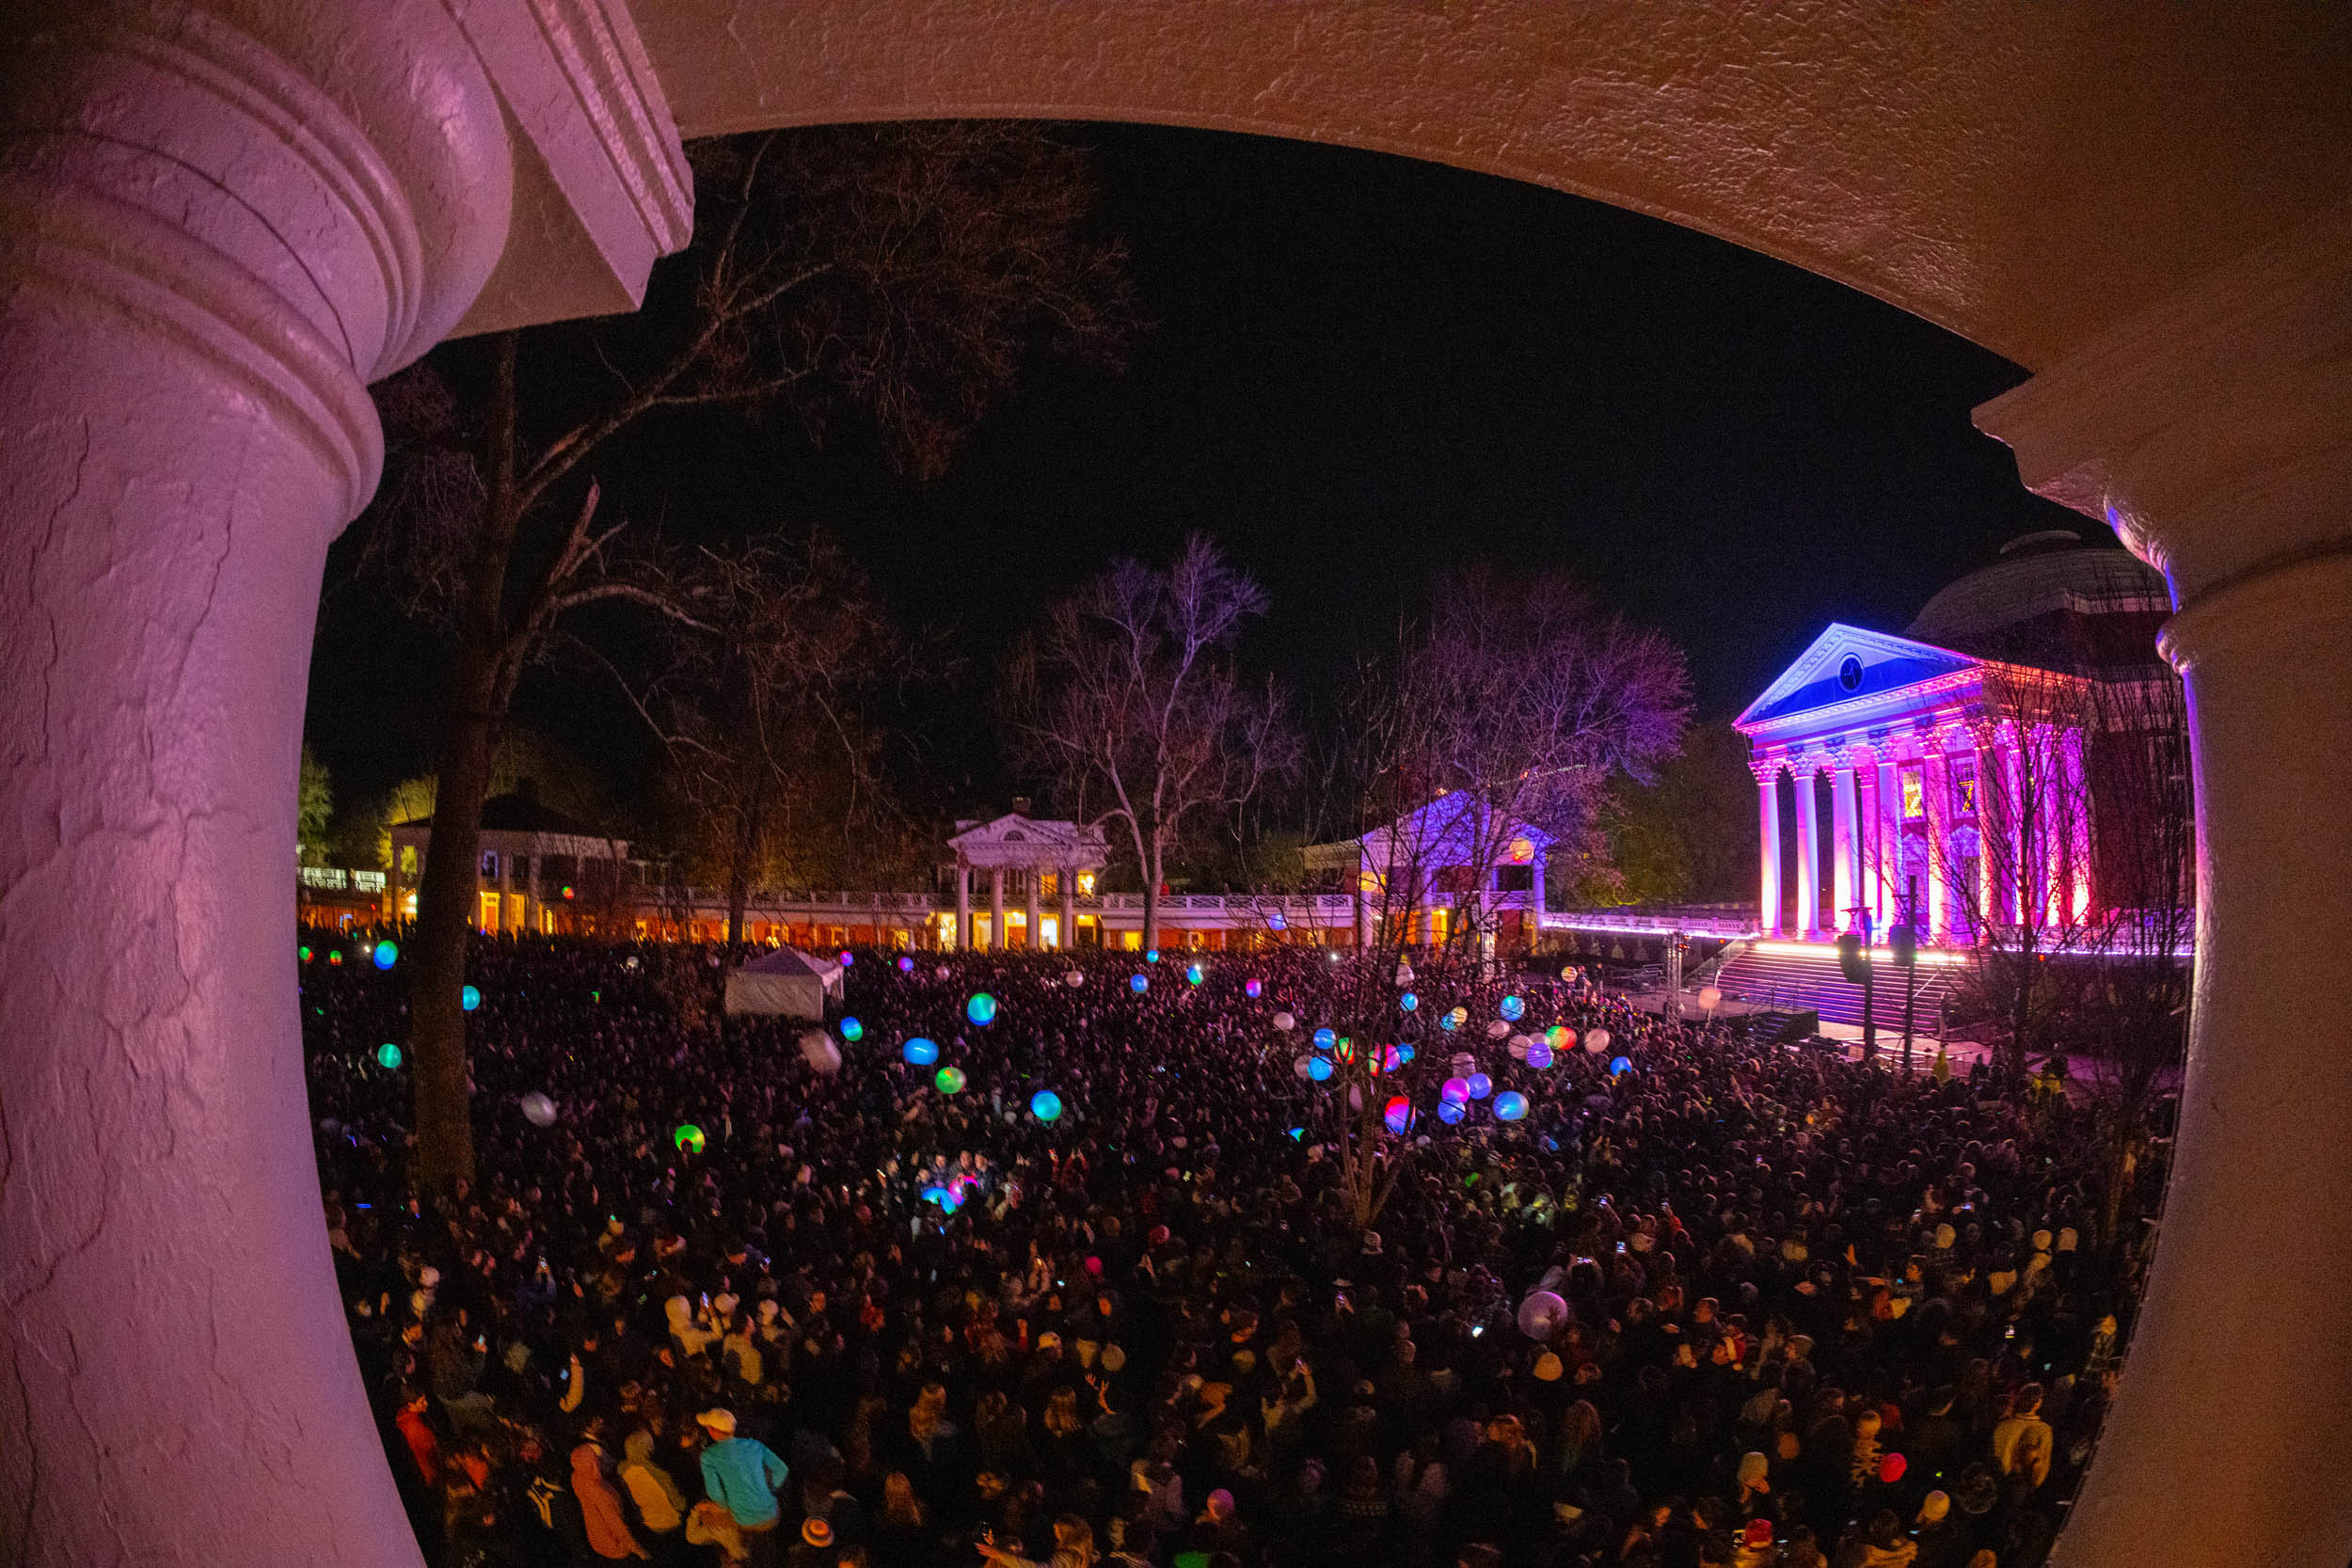 View of the lawn filled with people lit up in multiple colors